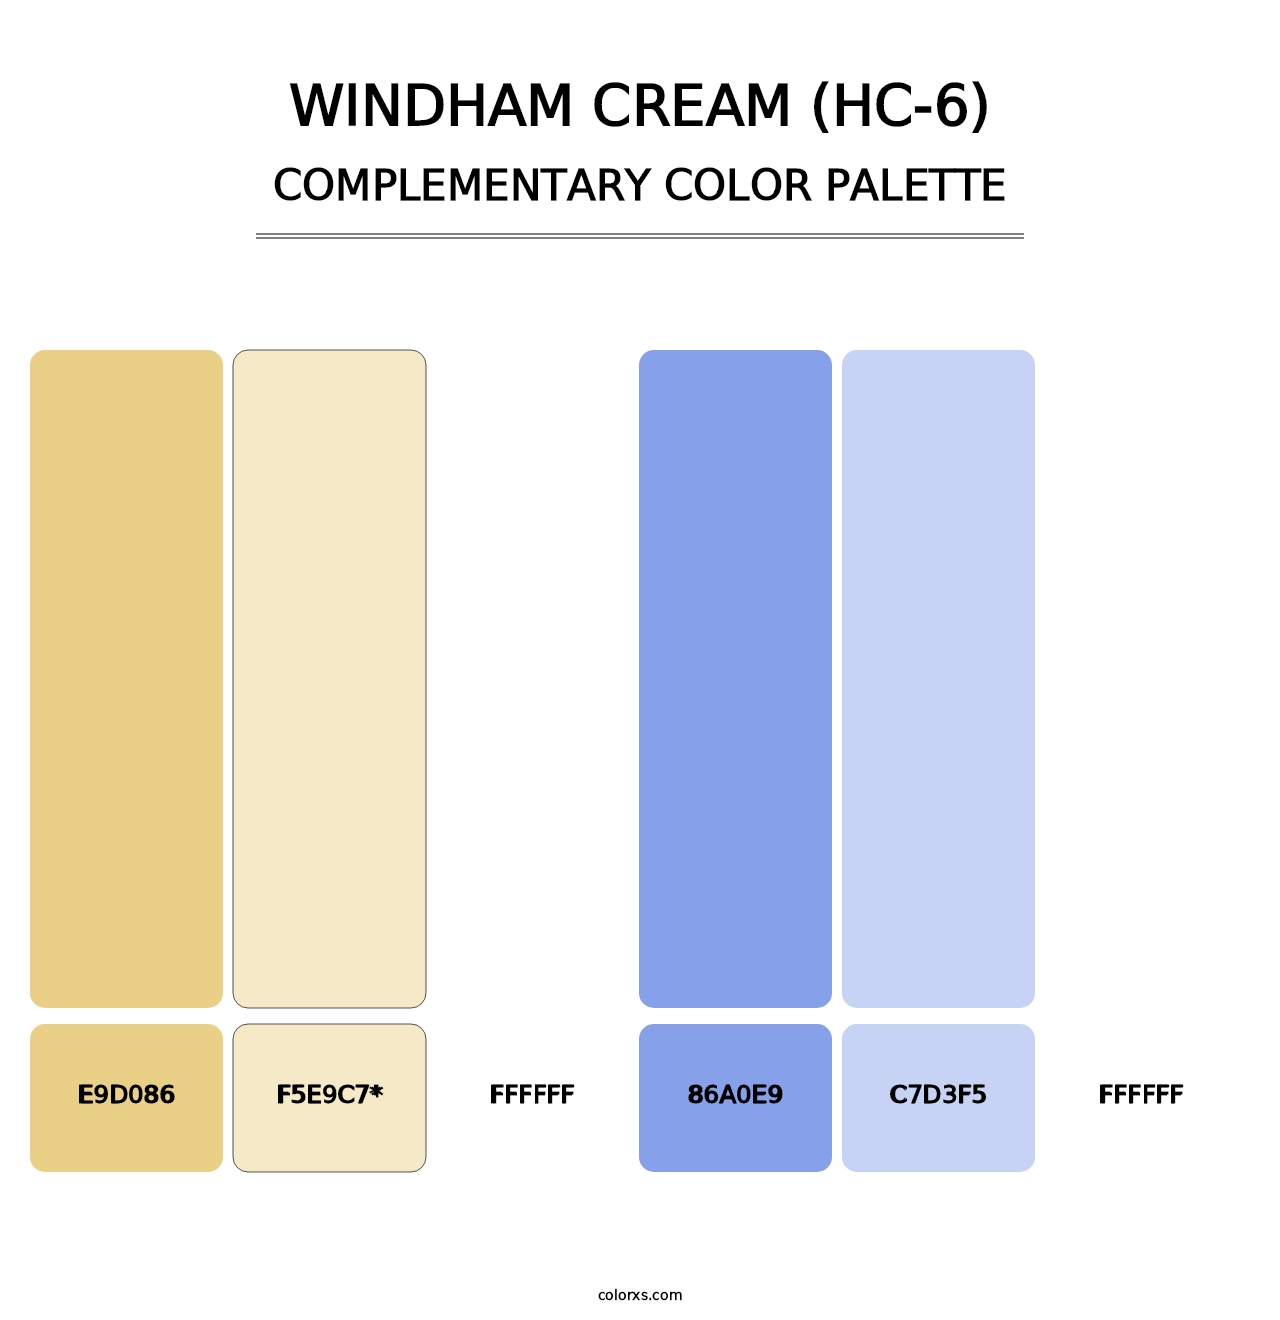 Windham Cream (HC-6) - Complementary Color Palette